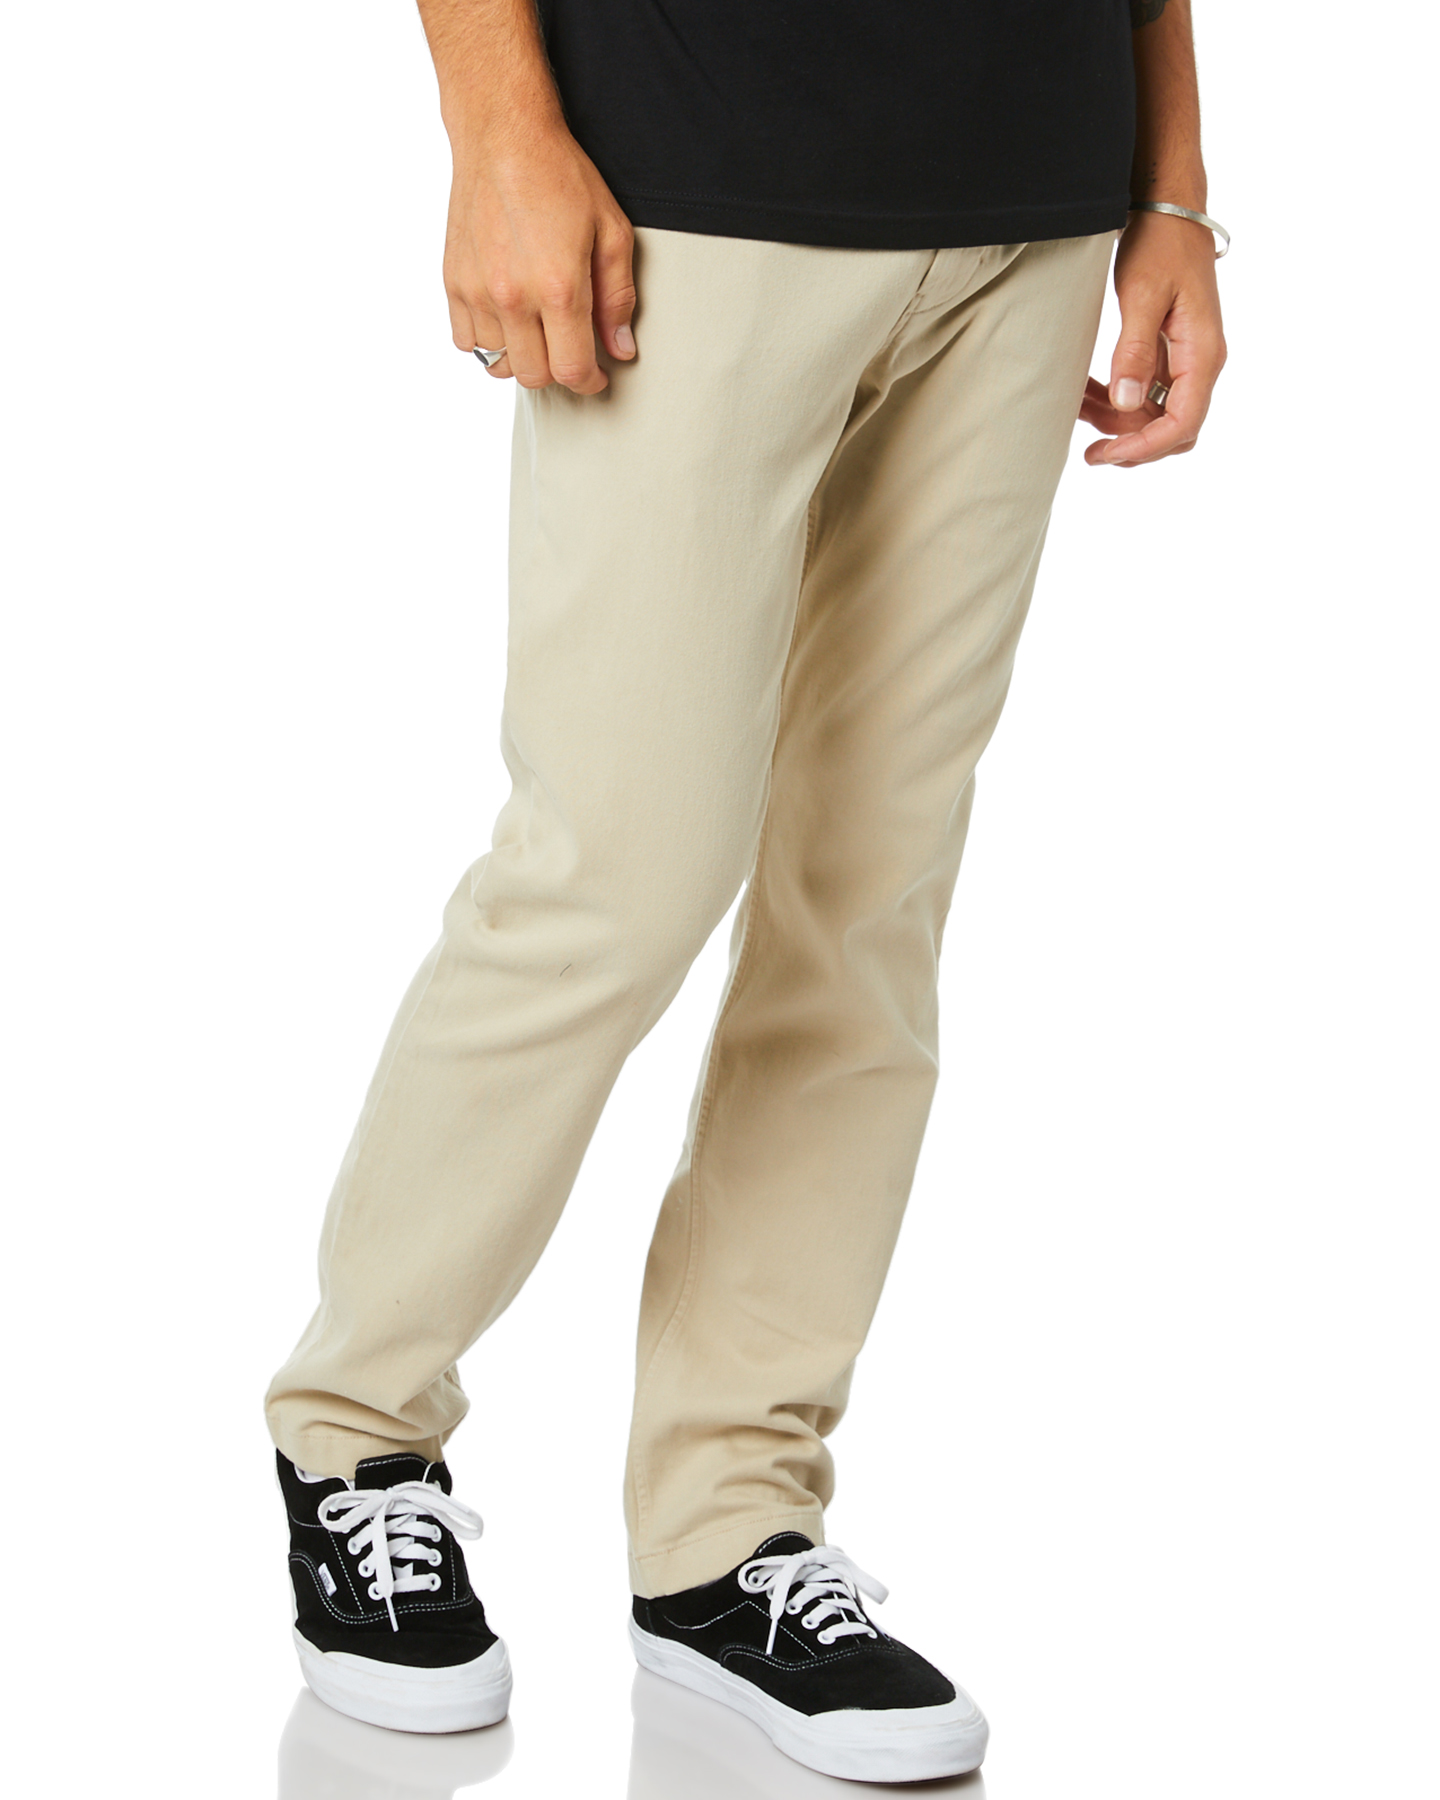 Outerknown Sea Legs Straight Mens Pant - Faded Khaki | SurfStitch